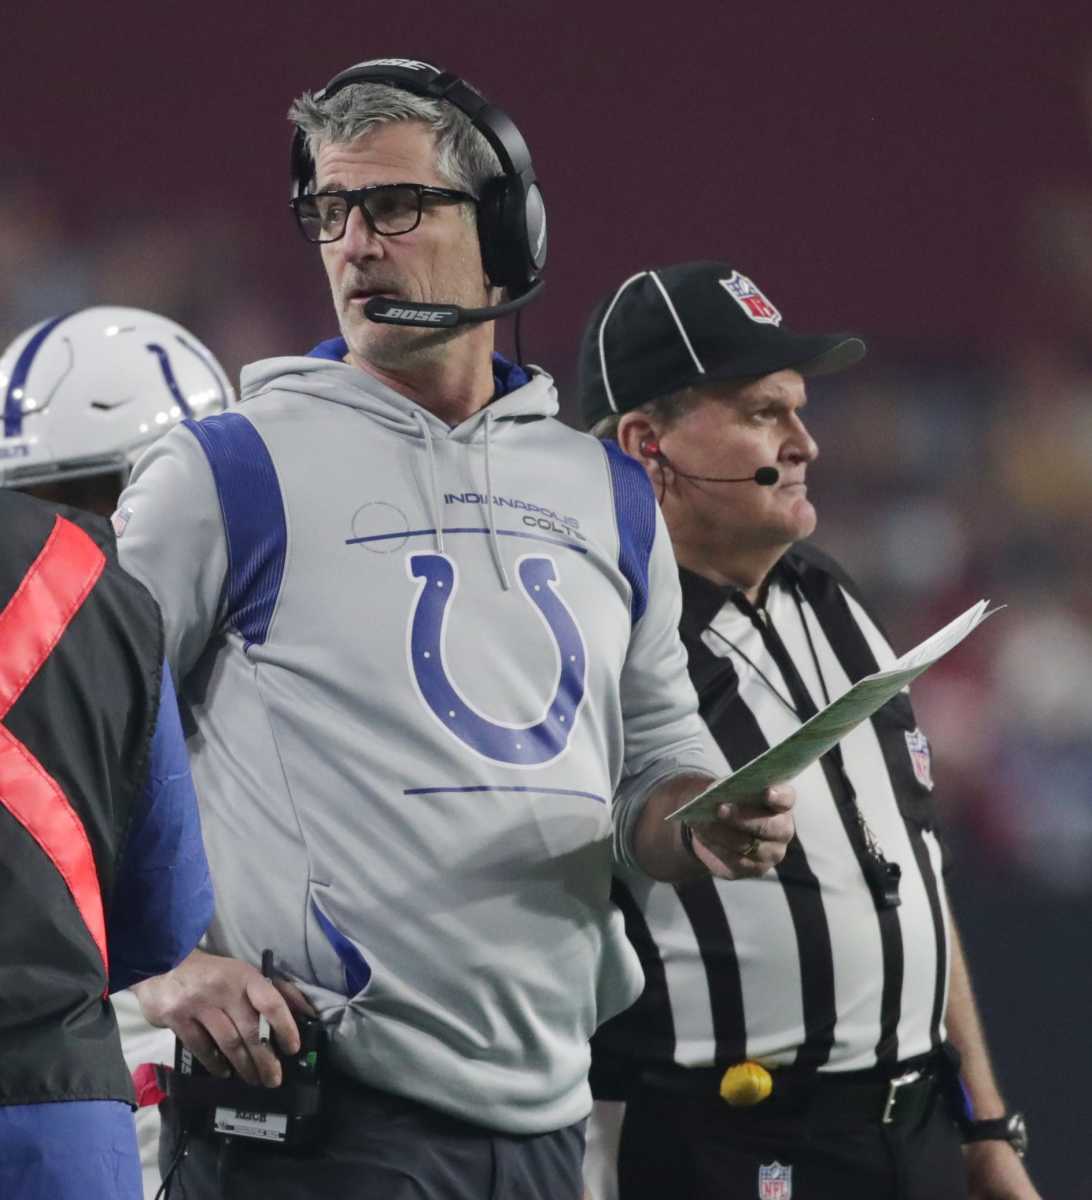 Indianapolis Colts head coach Frank Reich, Saturday, Dec. 25, 2021, at State Farm Stadium in Glendale, Ariz. Indianapolis Colts At Arizona Cardinals At State Farm Stadium In Glendale Ariz On Saturday Dec 25 2021 Christmas Day Nfl Syndication The Indianapolis Star